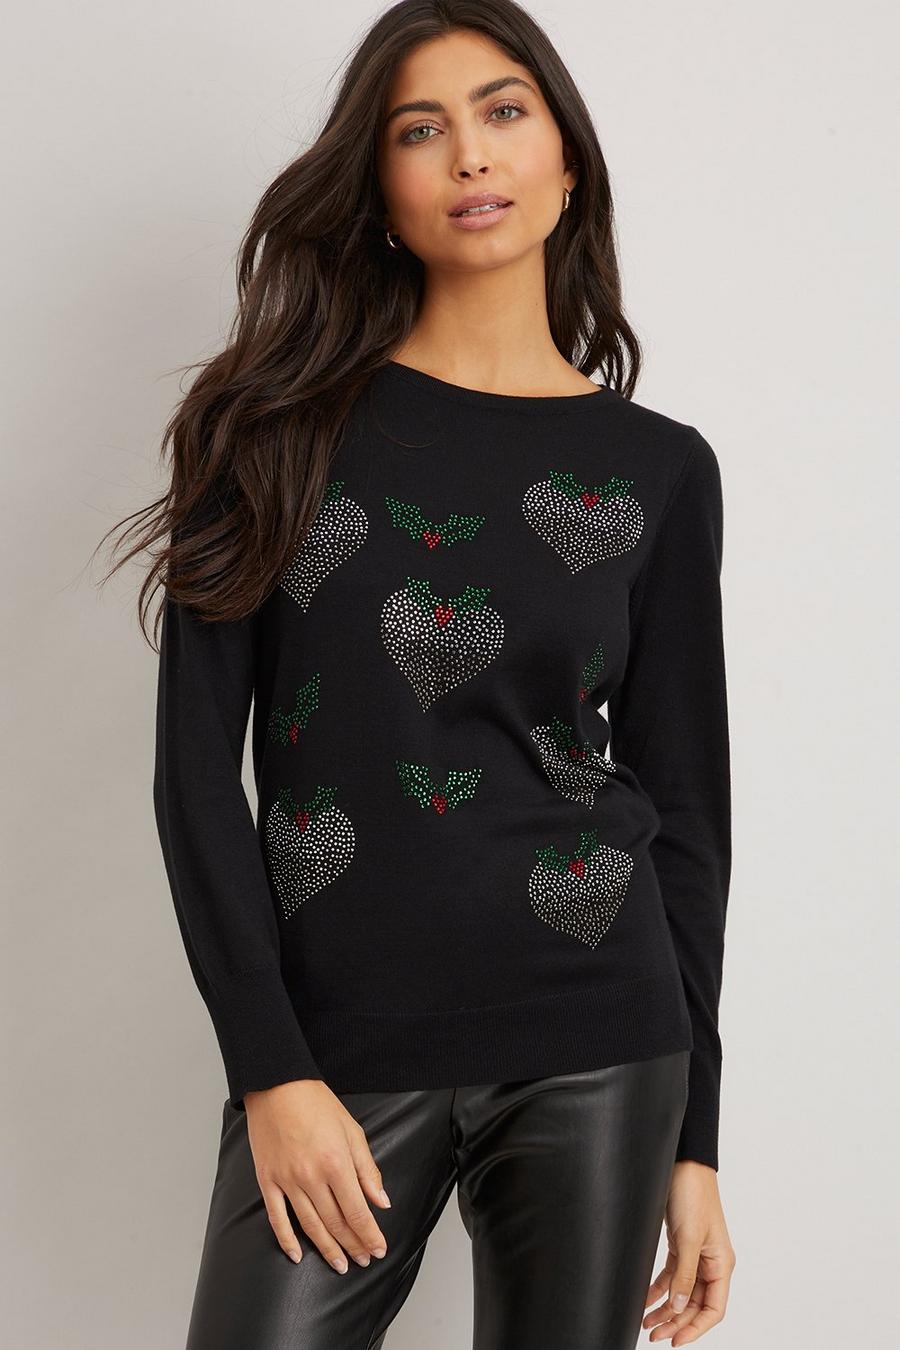 Scattered Heart Christmas Pudding Jumper